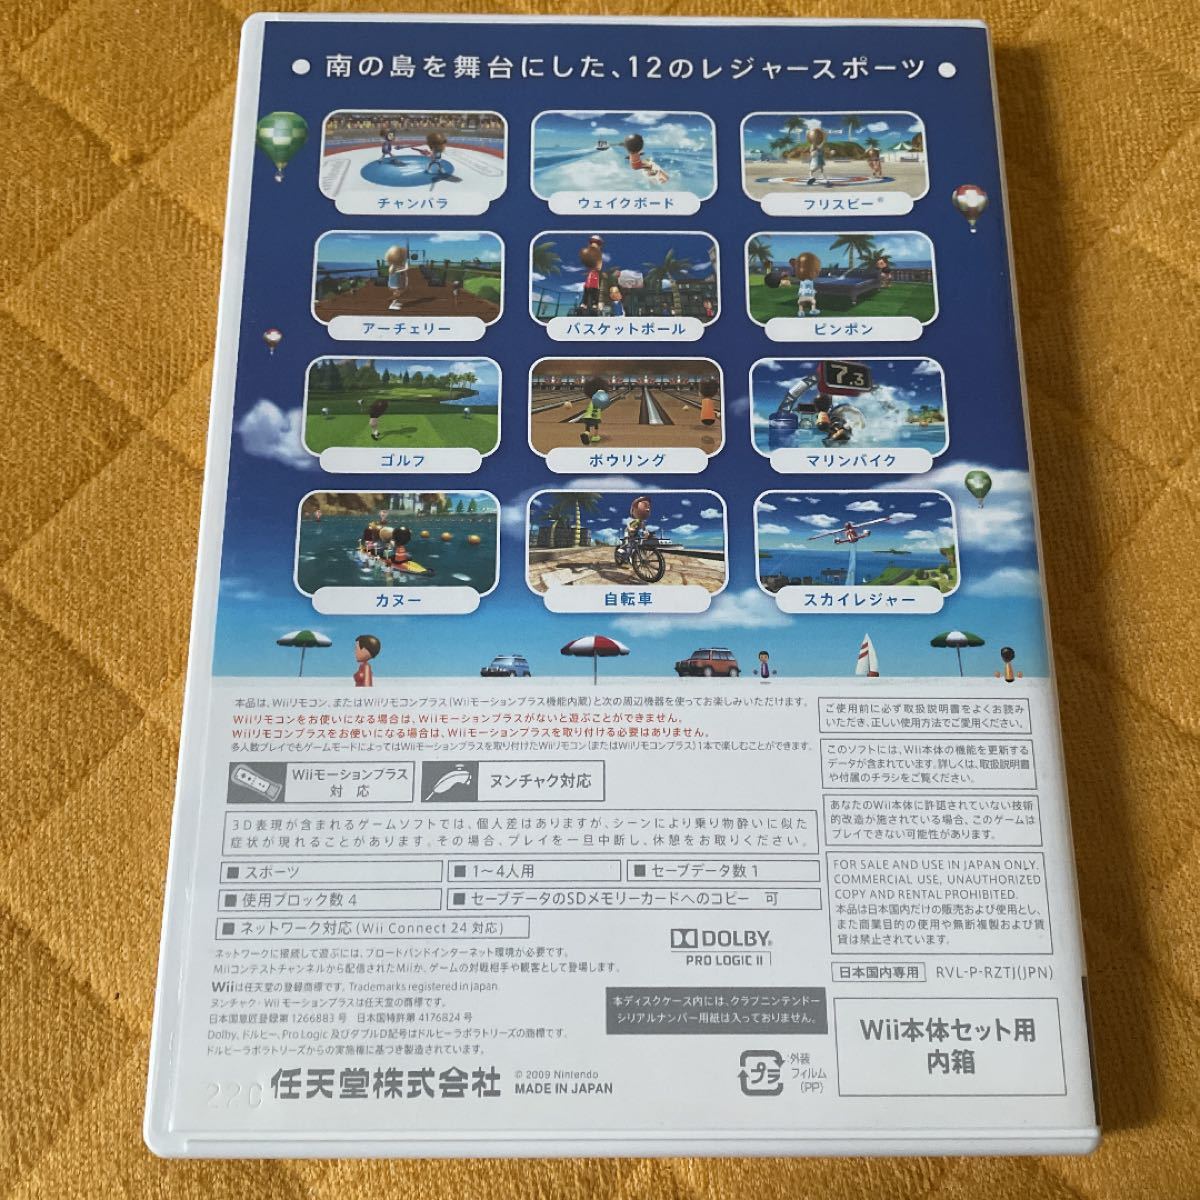 Wiiスポーツリゾート Wiiソフト Wii Sports Resort